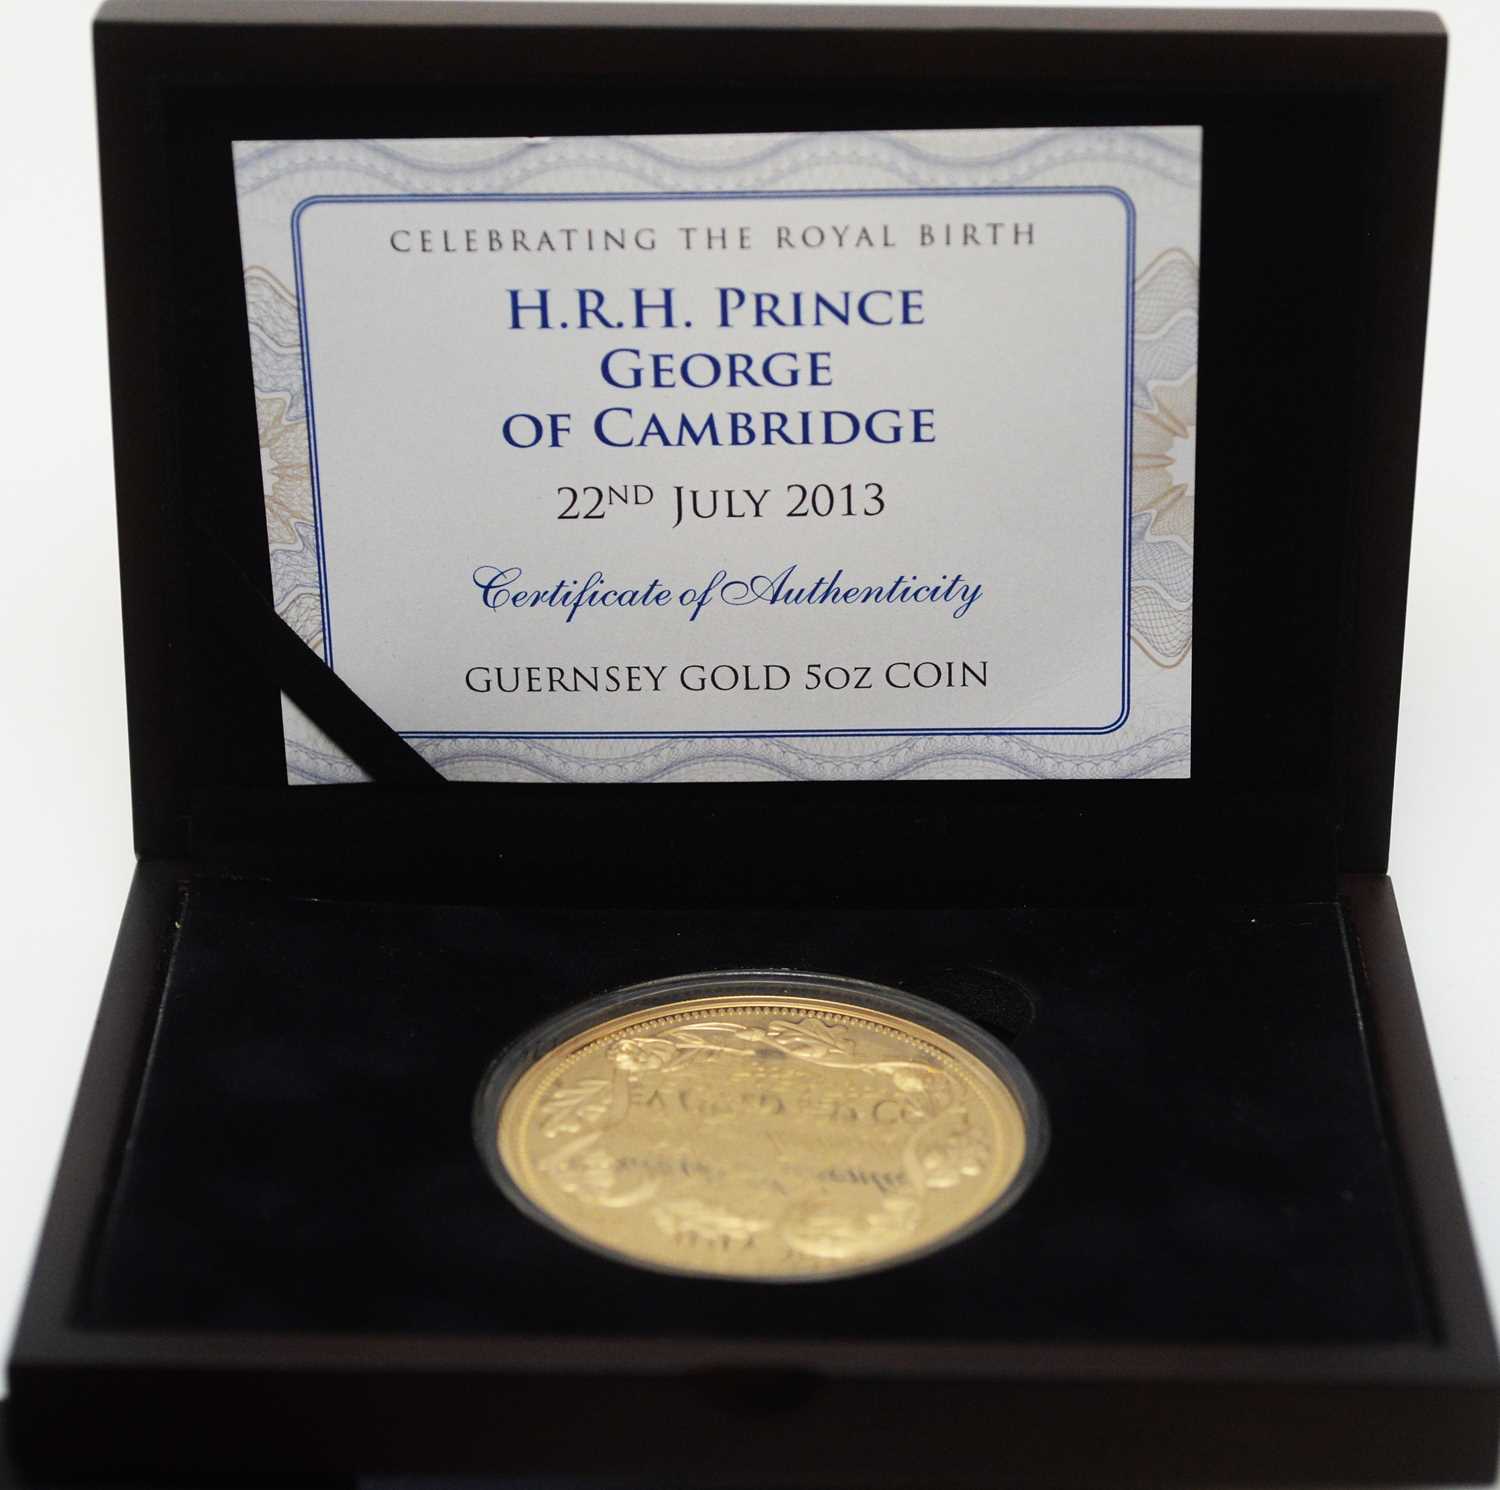 Lot 28 - The Royal Birth of H.R.H. Prince George of Cambridge 22nd July 2013 £10 gold coin